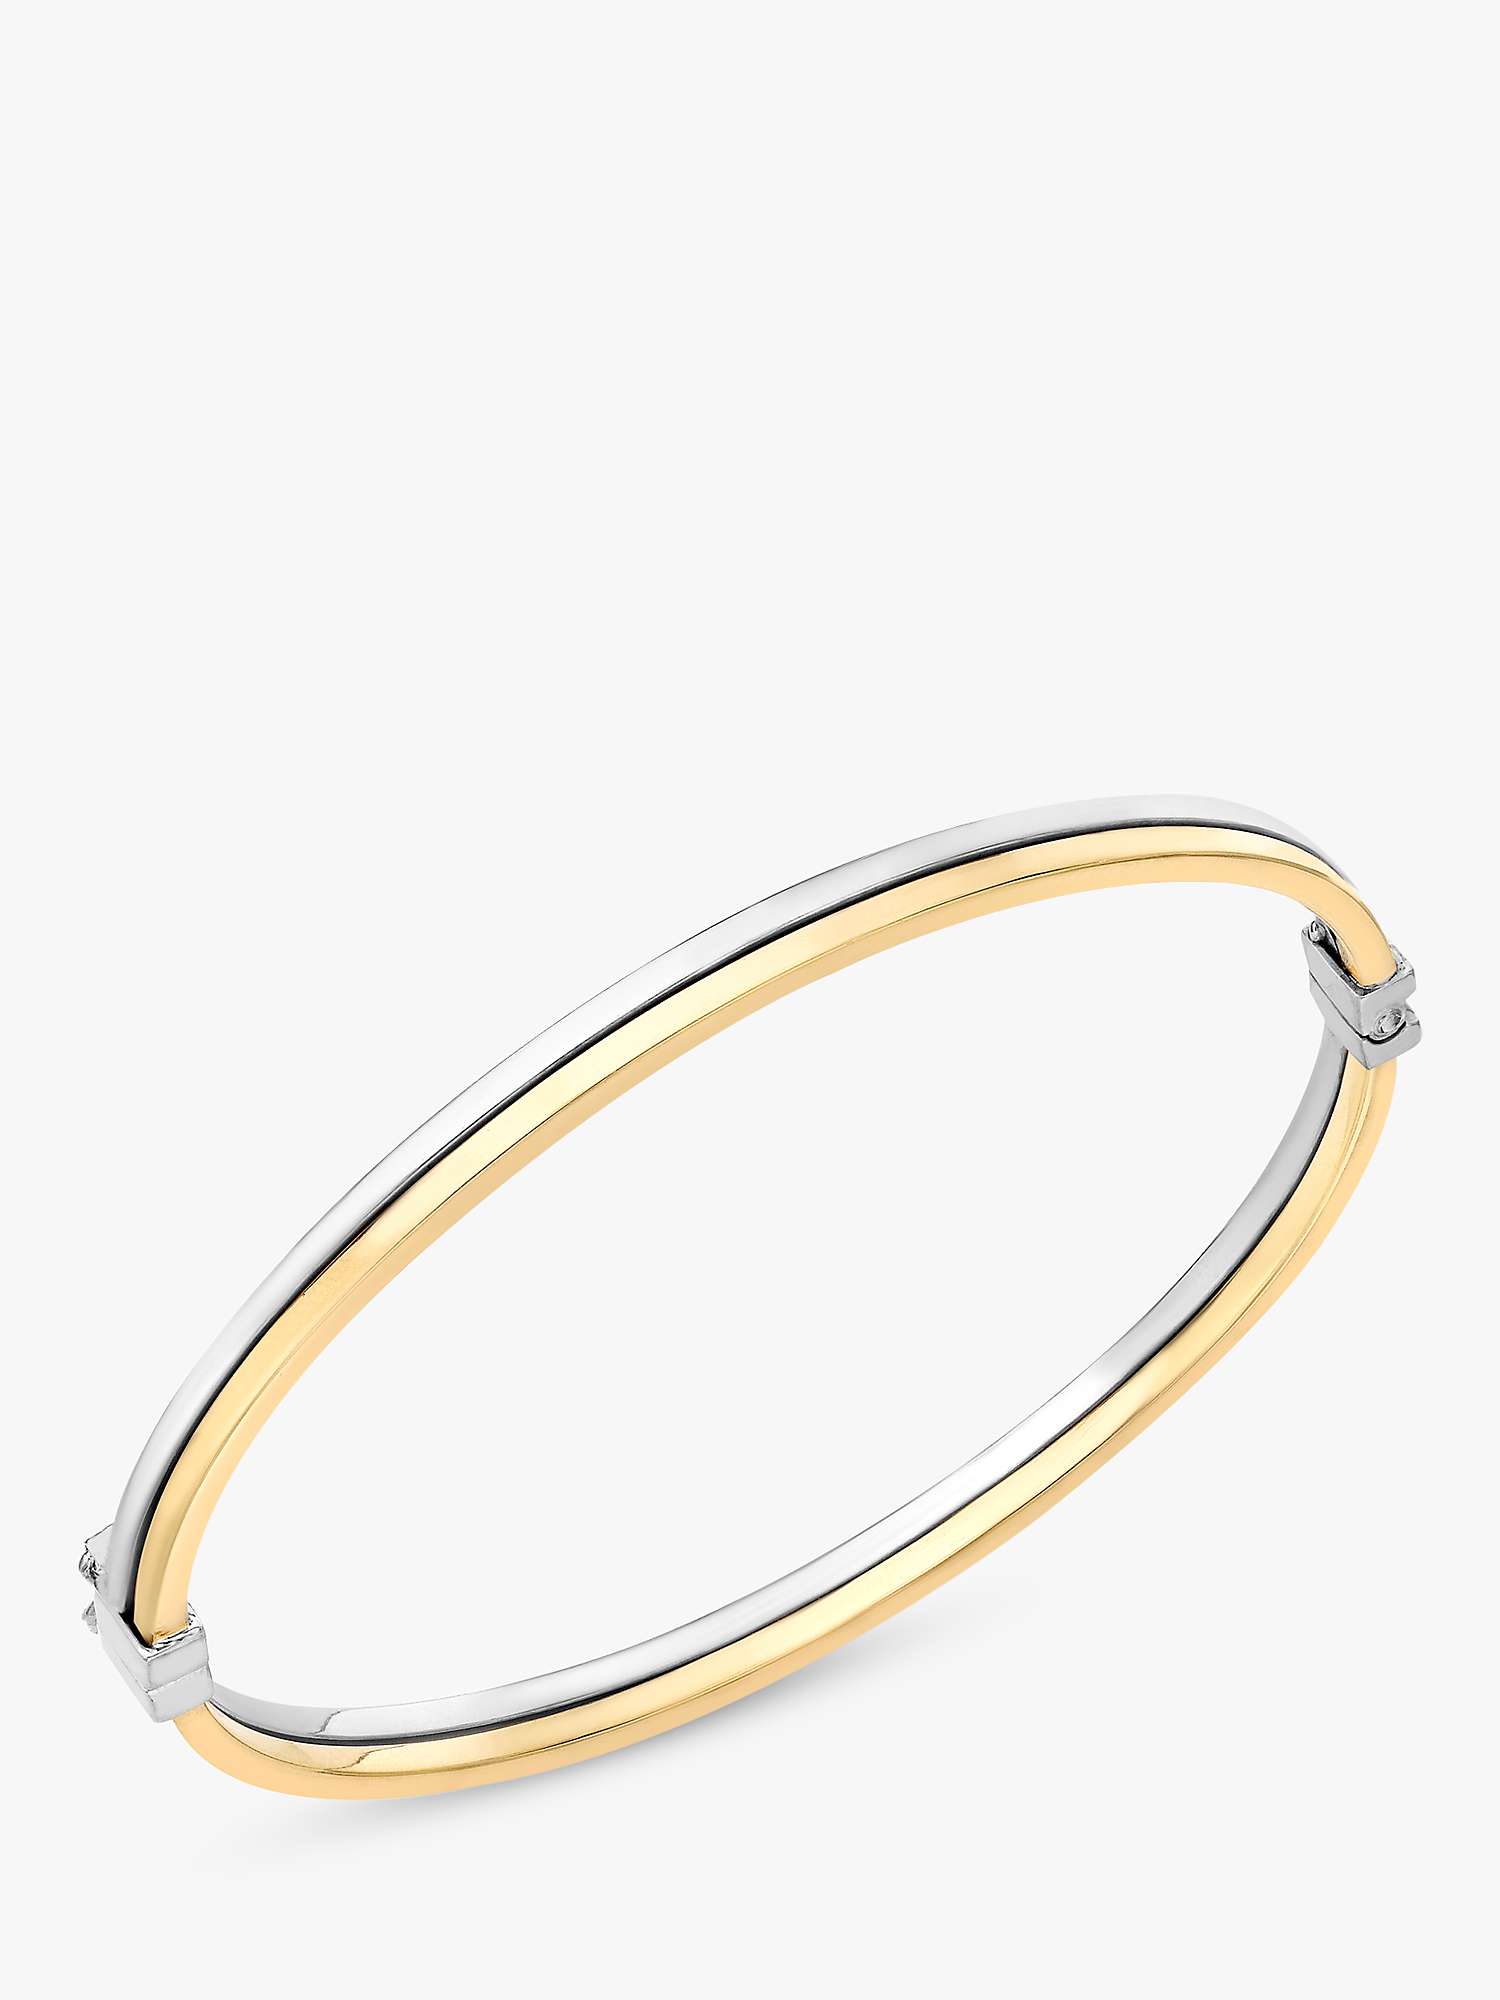 Buy IBB 9ct Two Colour Gold Double Tube Bangle, Yellow Gold/White Gold Online at johnlewis.com